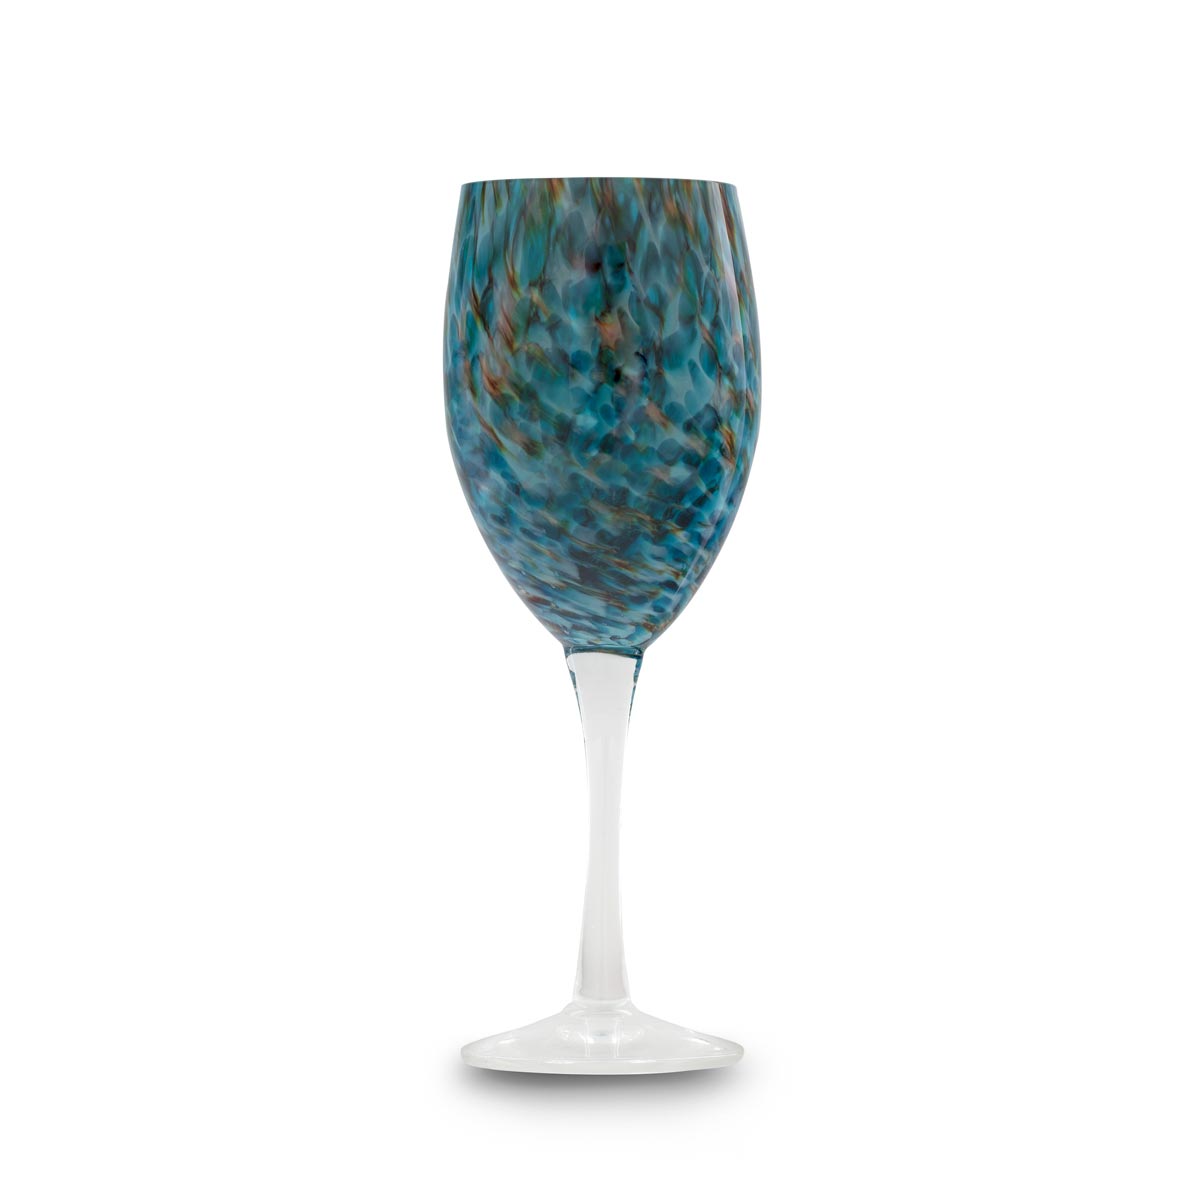 ET Crater Lake Wine Glass